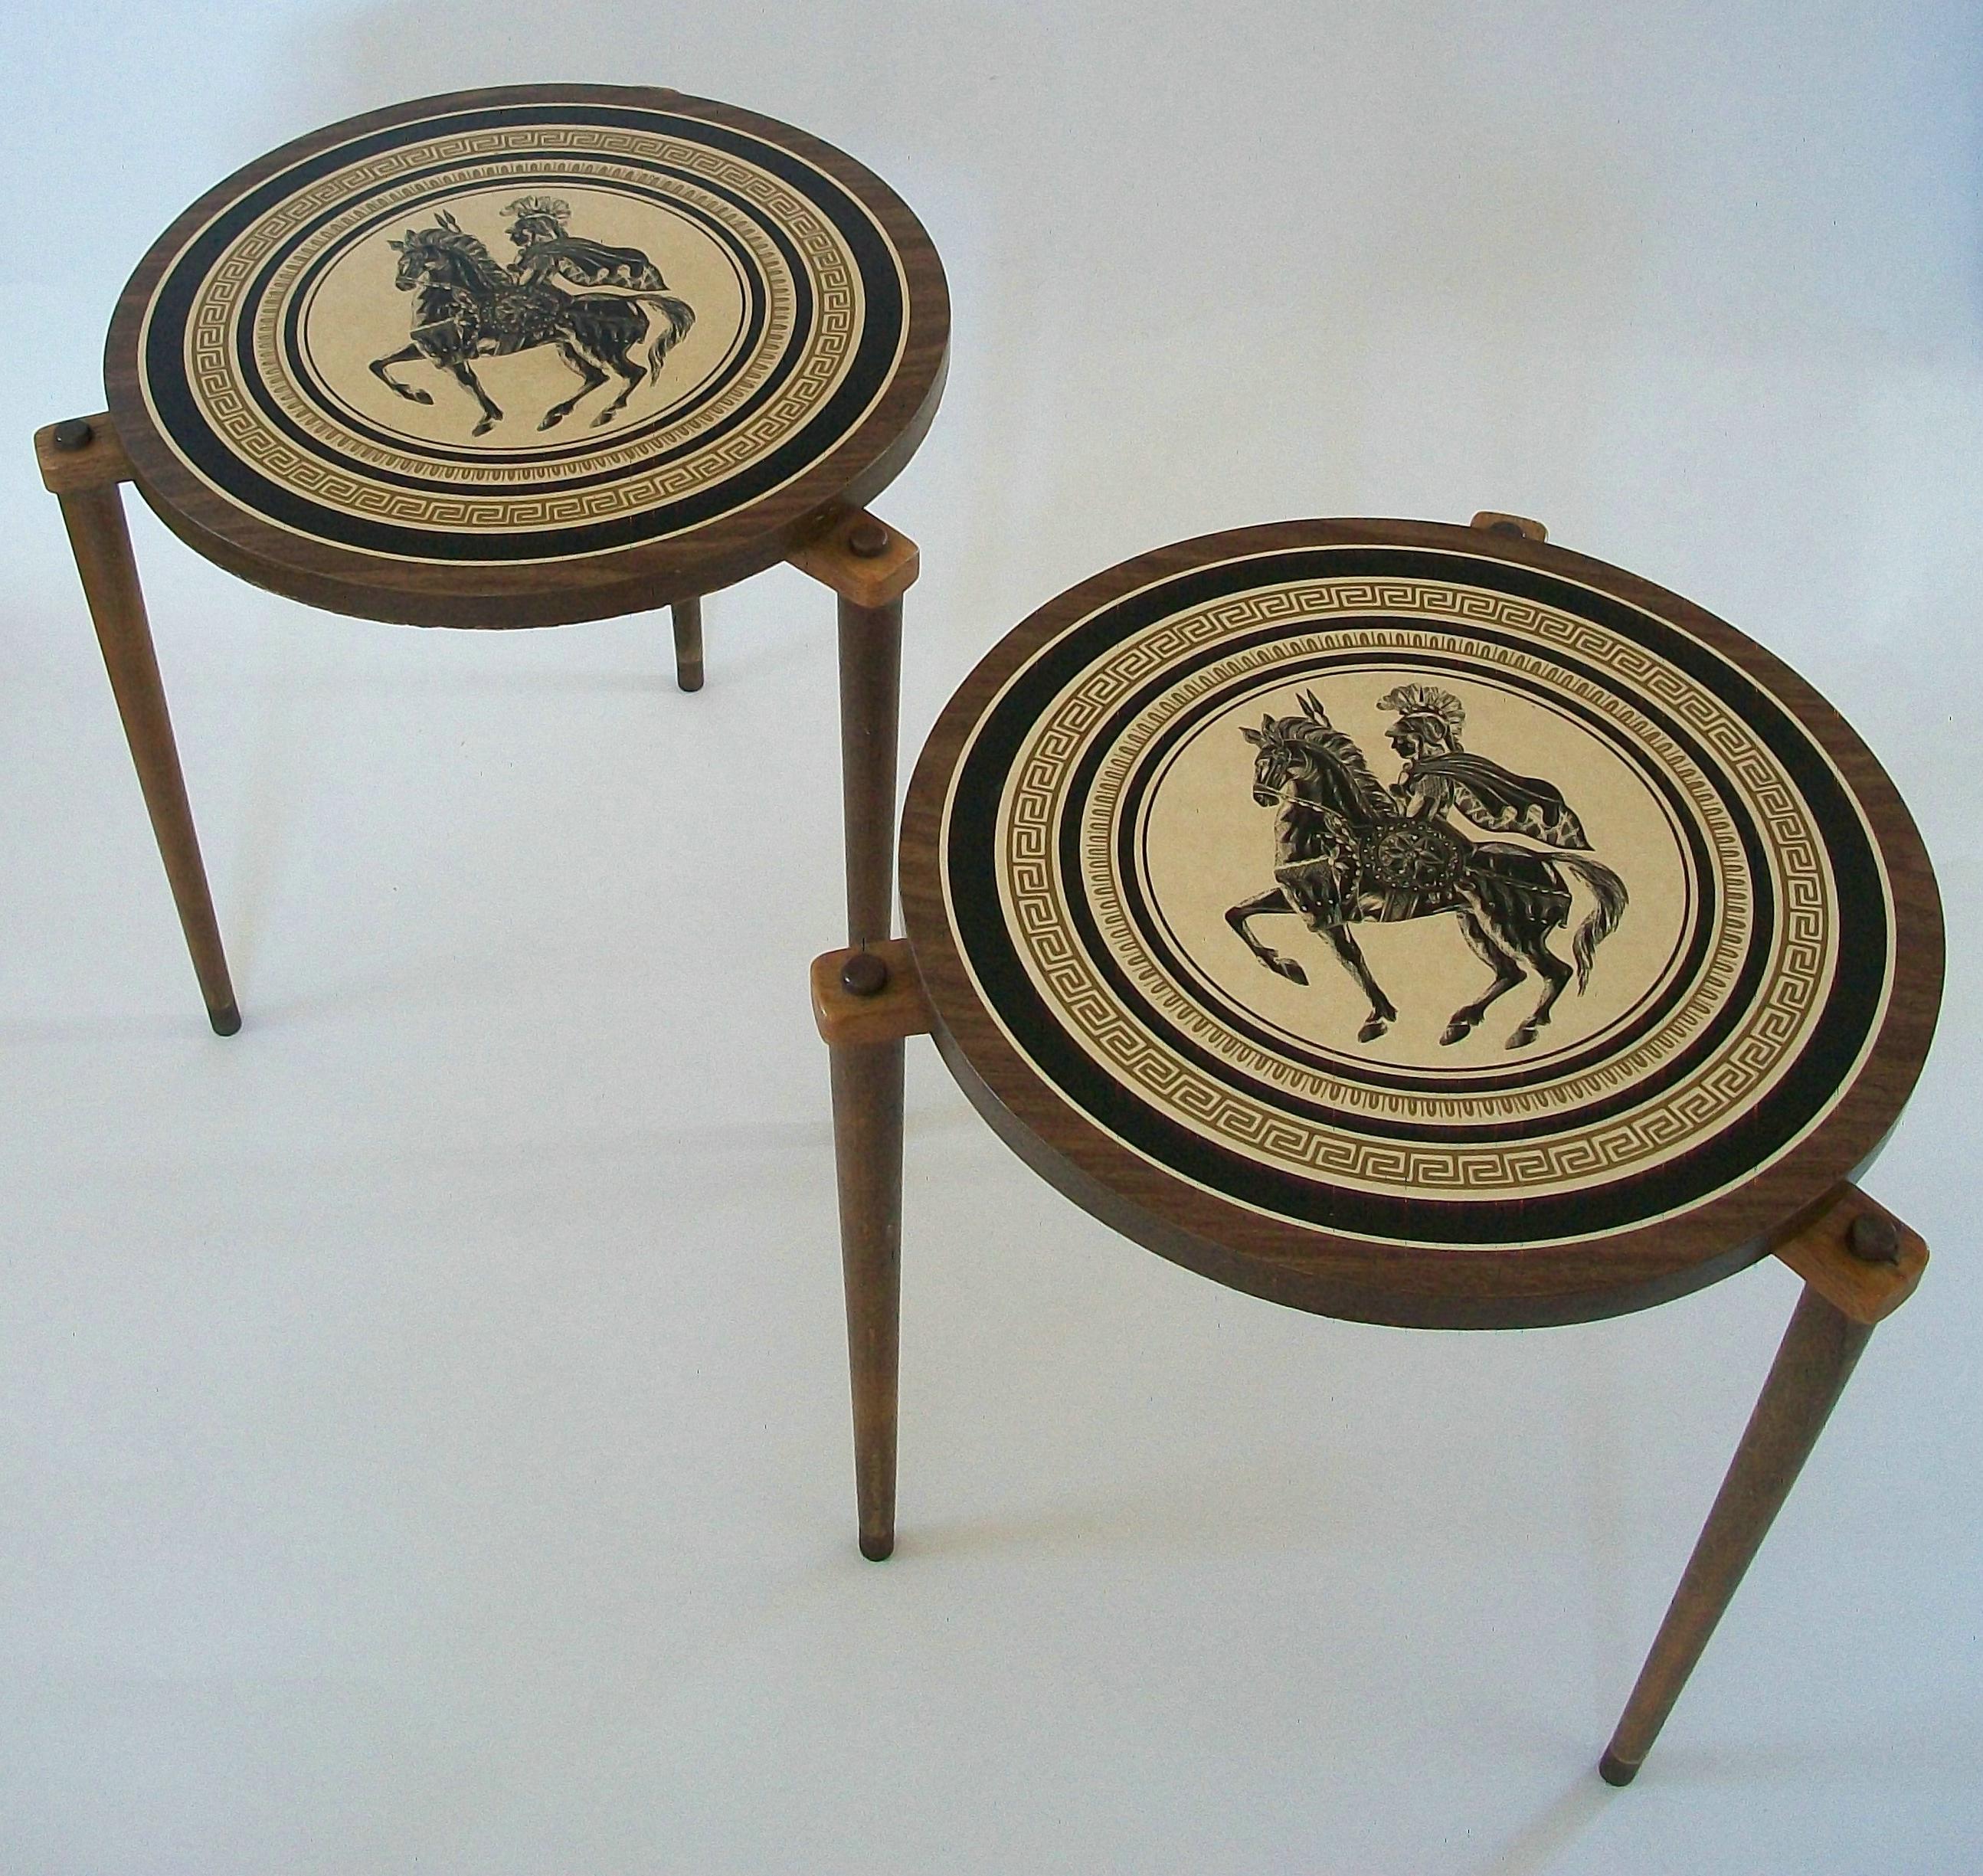 American Vintage Pair of Fornasetti Style Stacking Occasional Tables - U.S. - Mid 20th C.